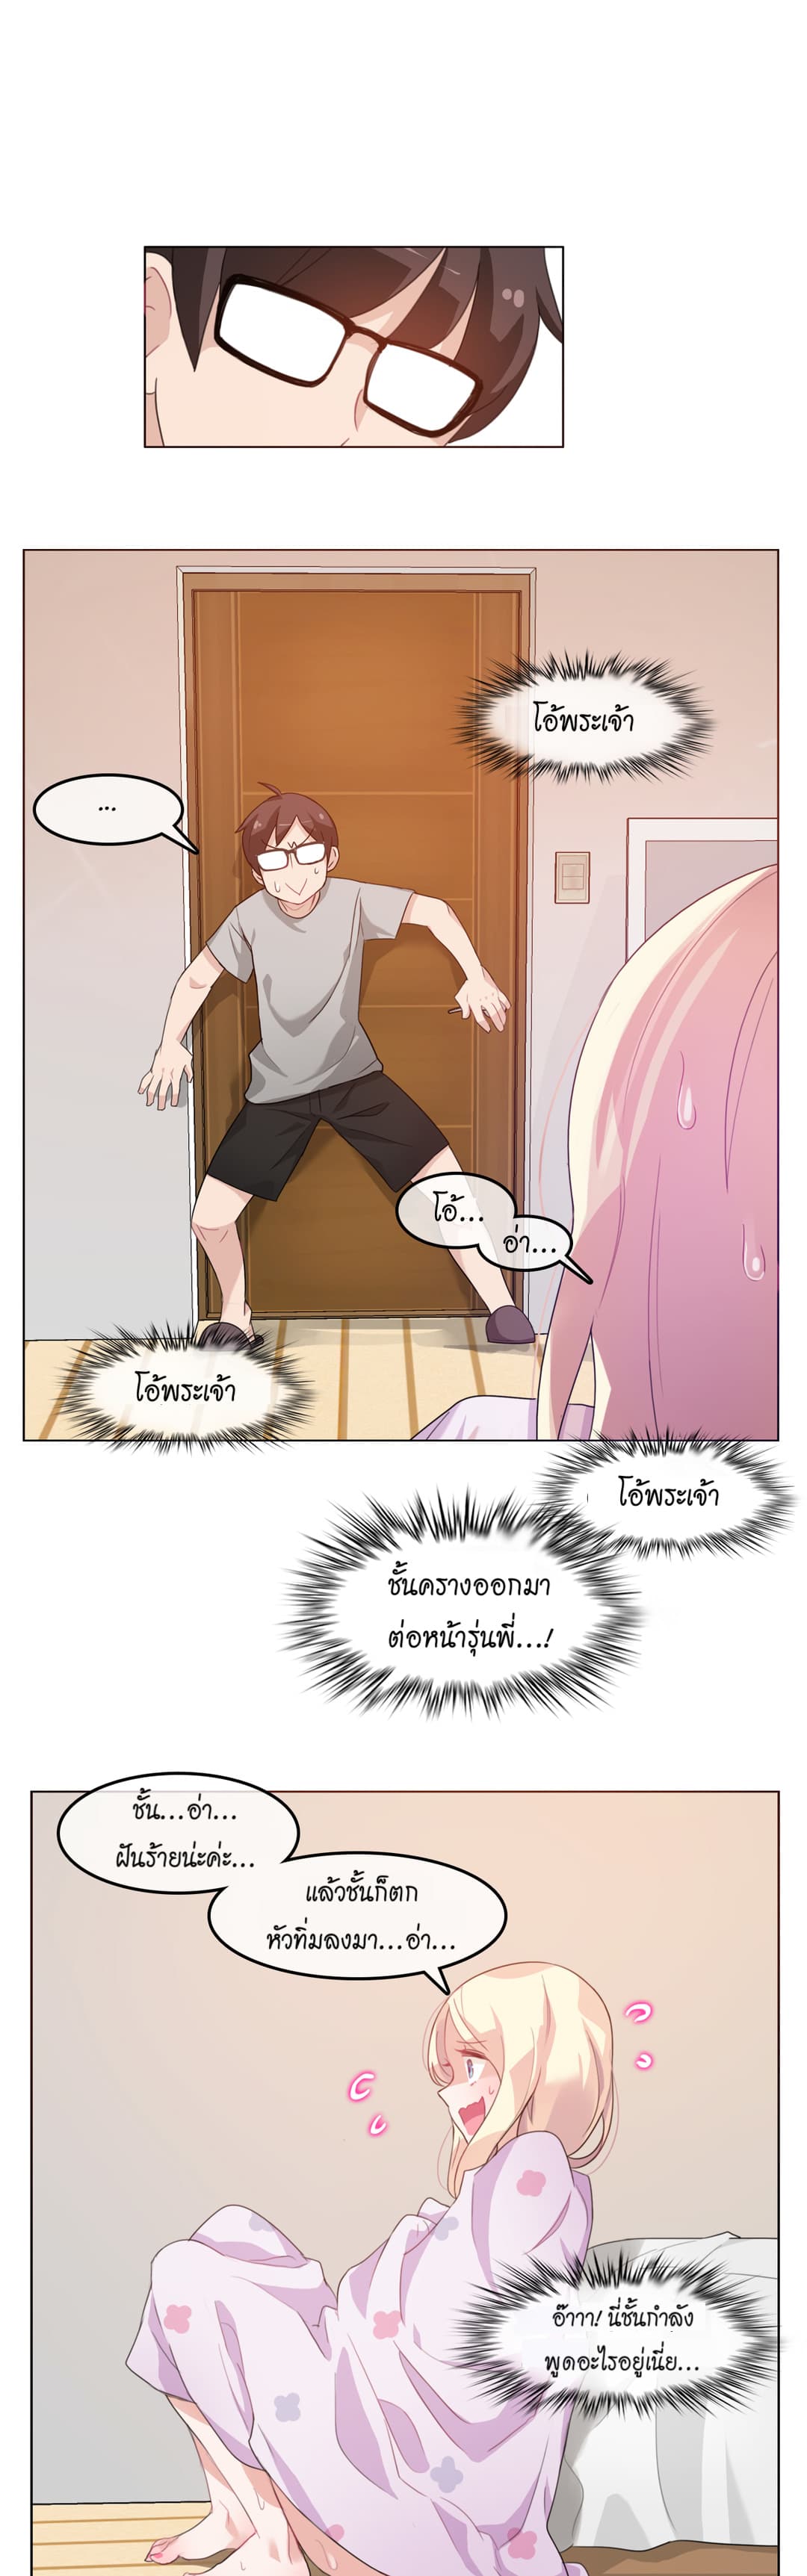 A Pervert’s Daily Life 7 (20)